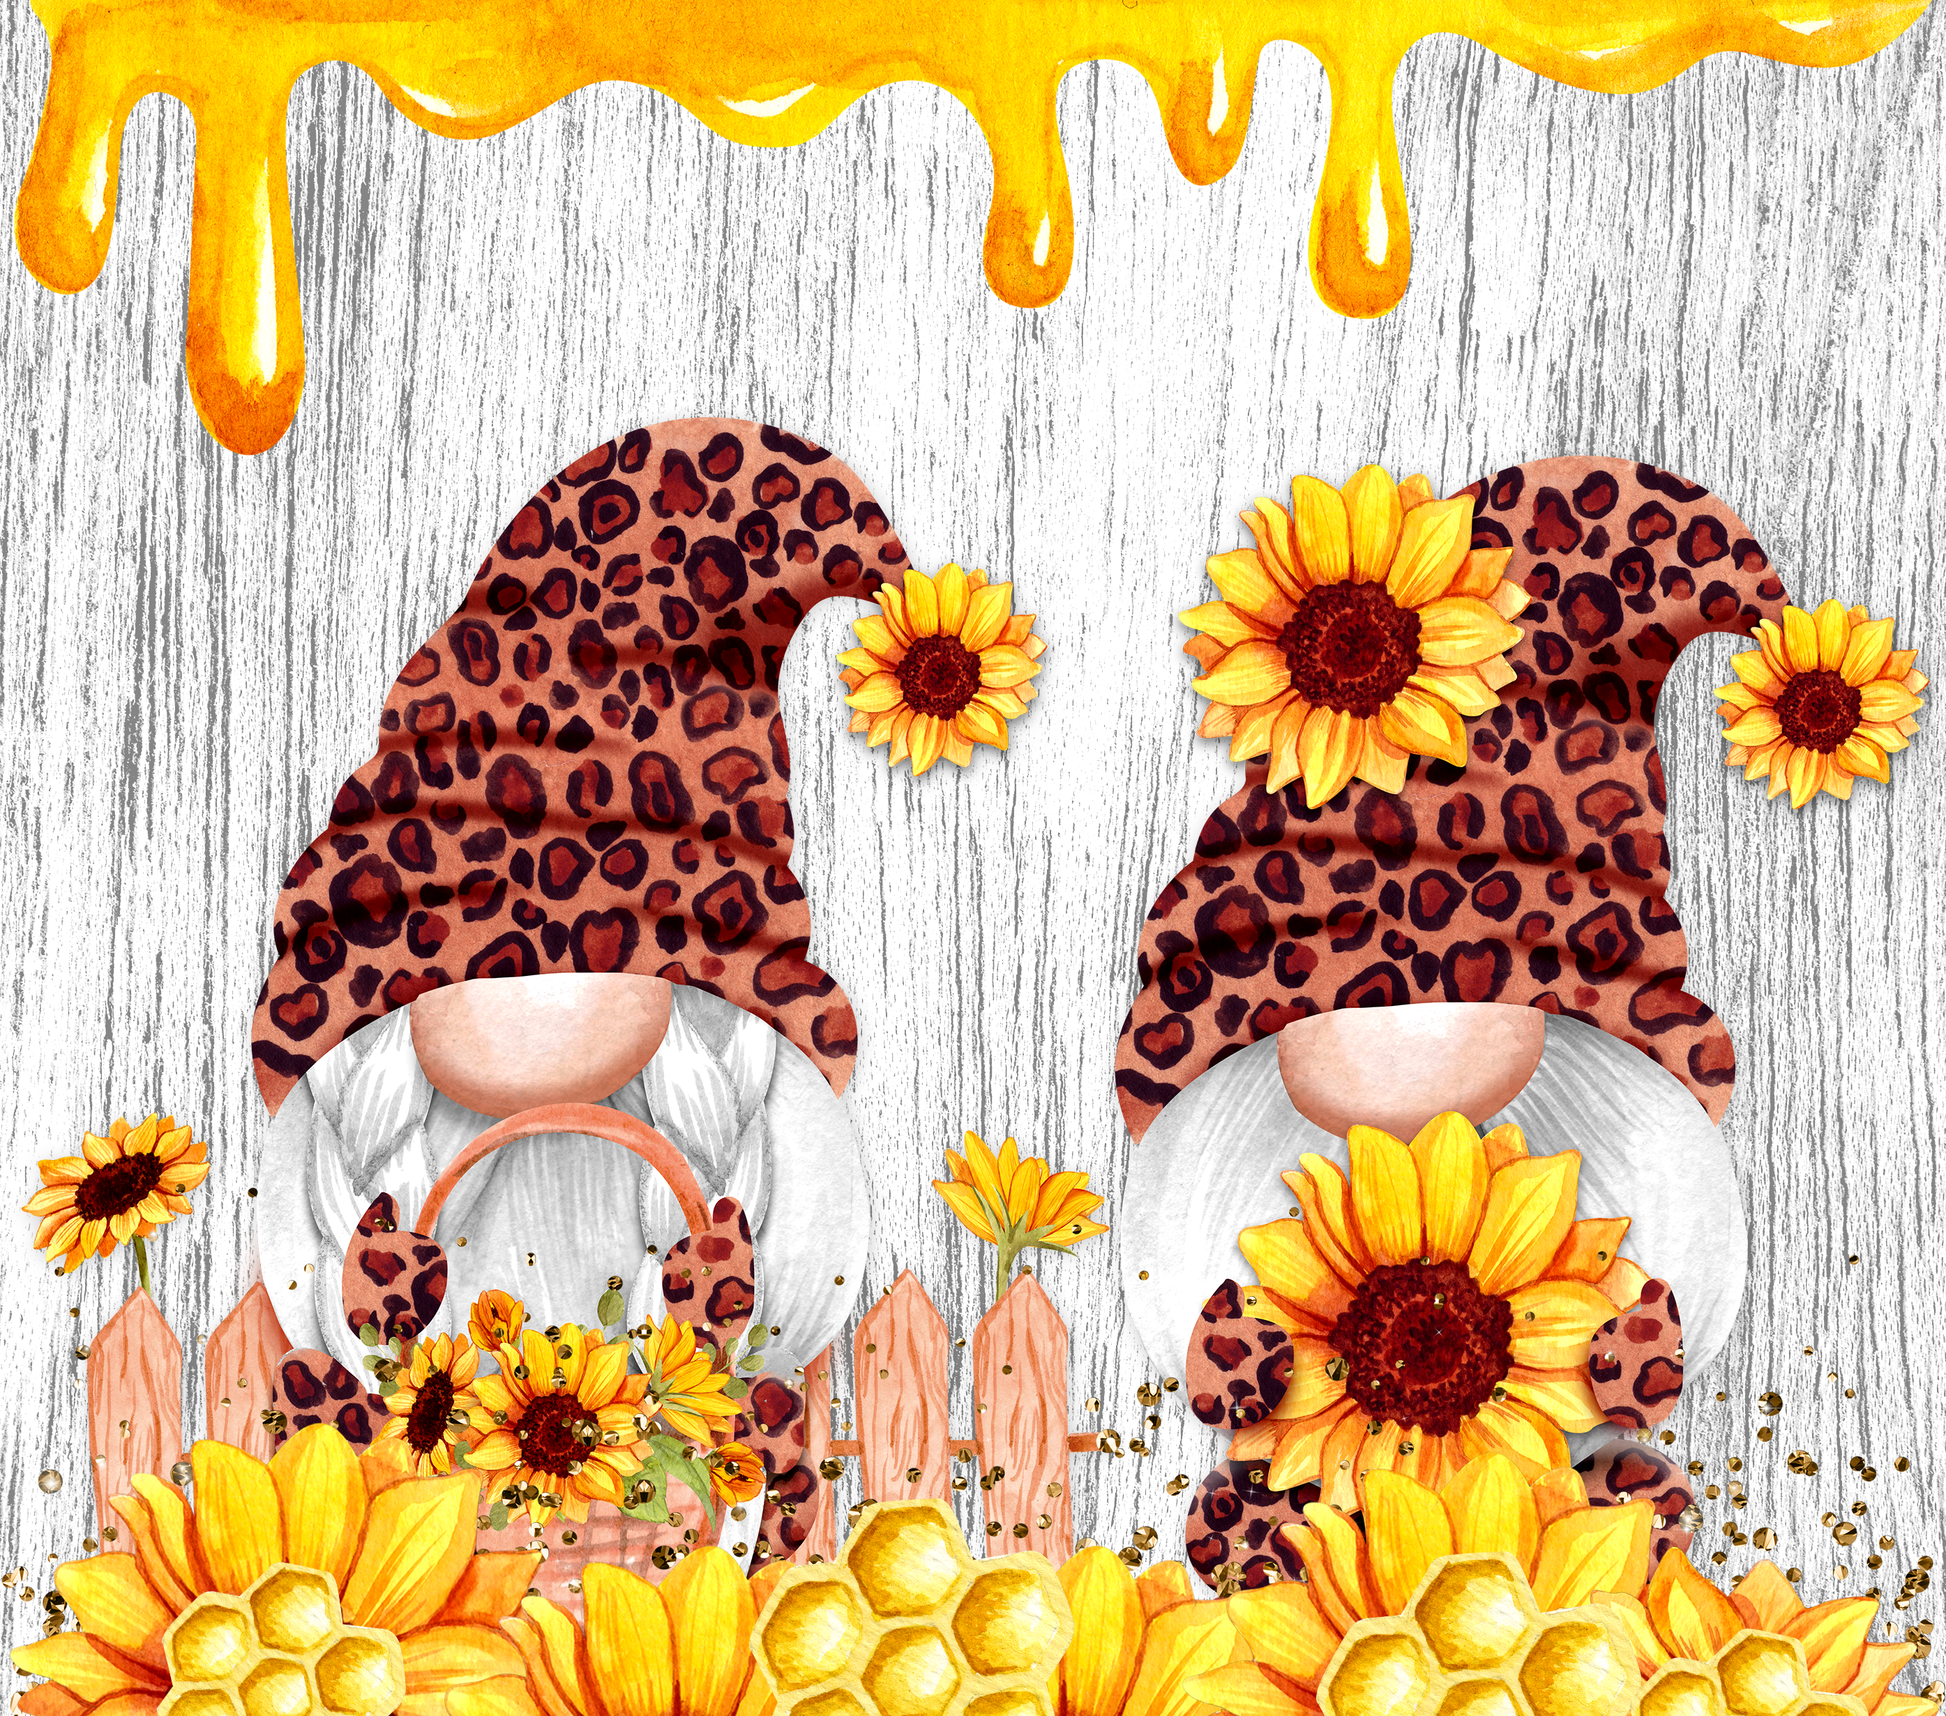 20 oz Stainless Steel Tumbler With Gnomes Enjoying Sunflowers While Honey Drips Down From The Top